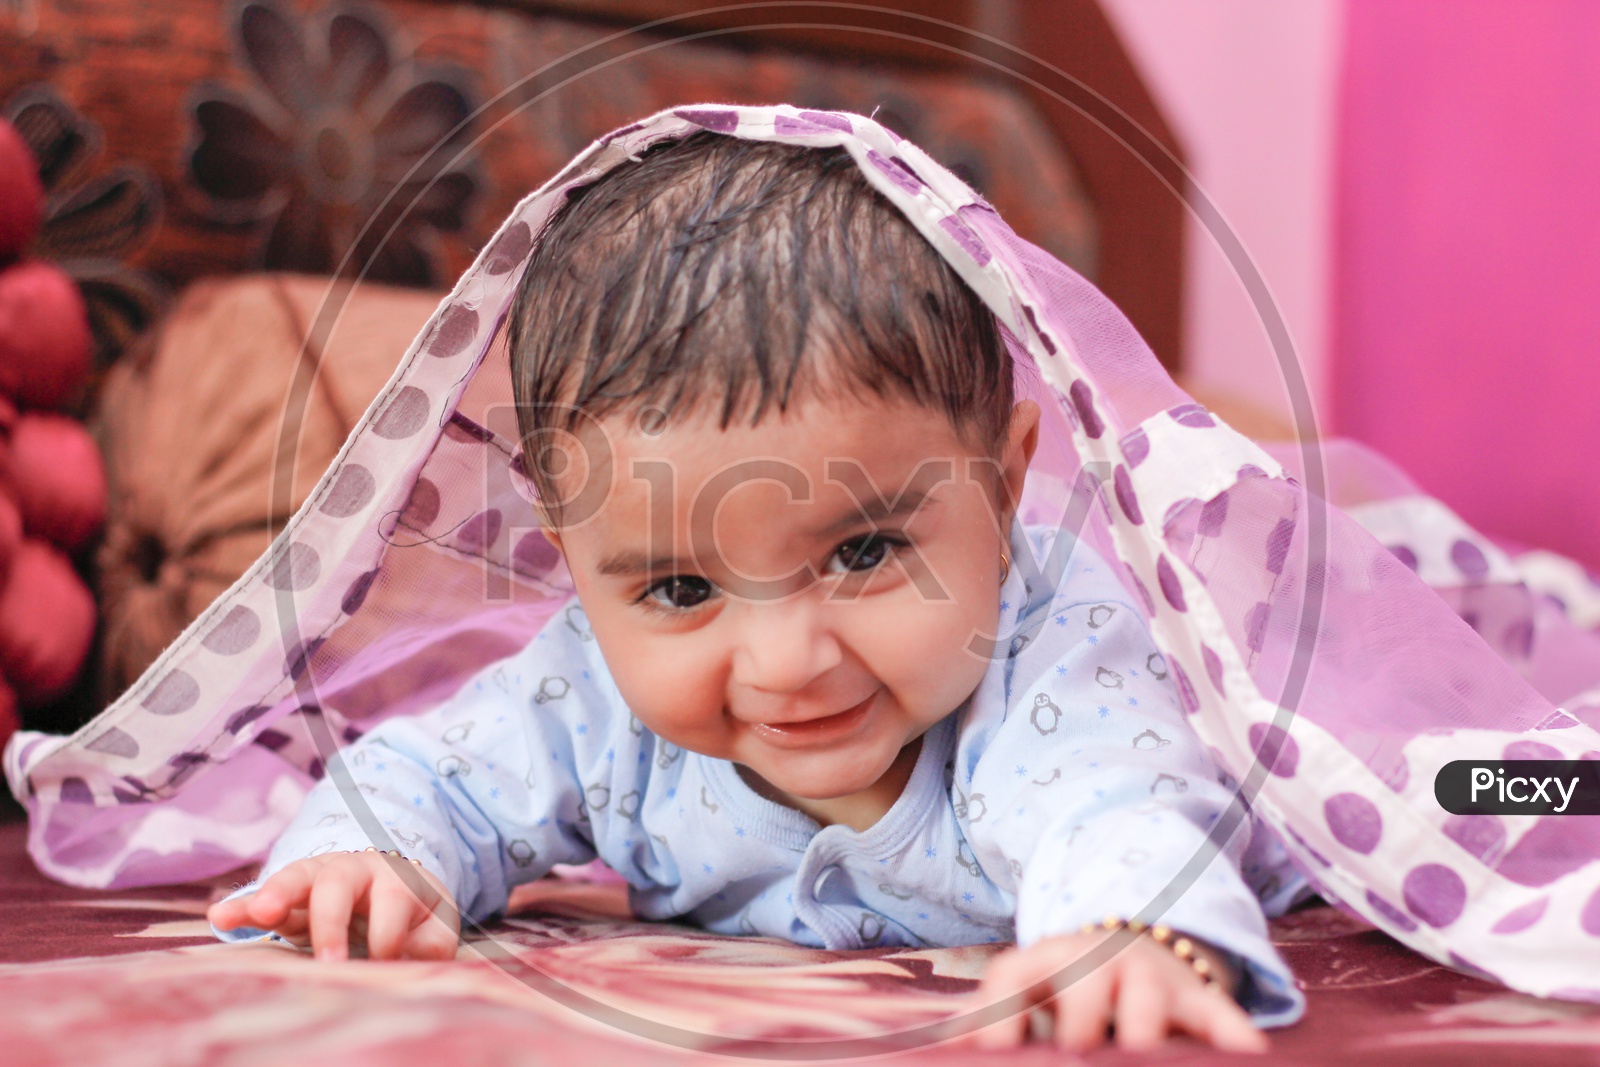 Indian Cute Baby Boy With a Smiling Face lying on bed